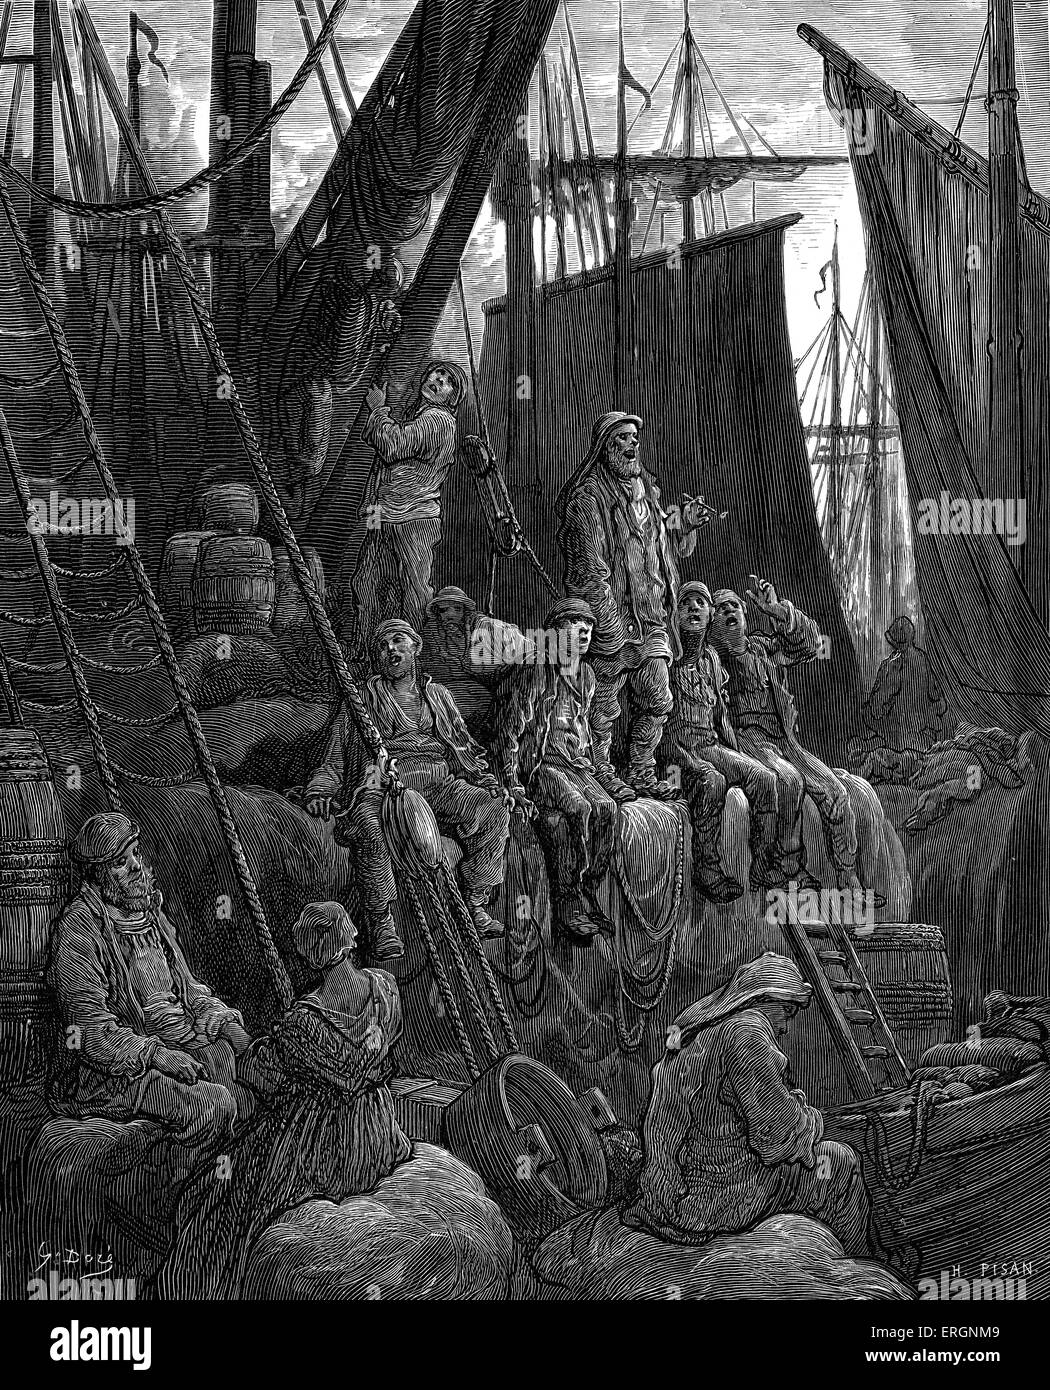 Off Billingsgate. Shows men on a boat singing to entertain themselves. Engraving by Gustave Doré, from 'London, a Pilgrimage, by Gustave Doré and Blanchard Jerrold', 1872. Stock Photo